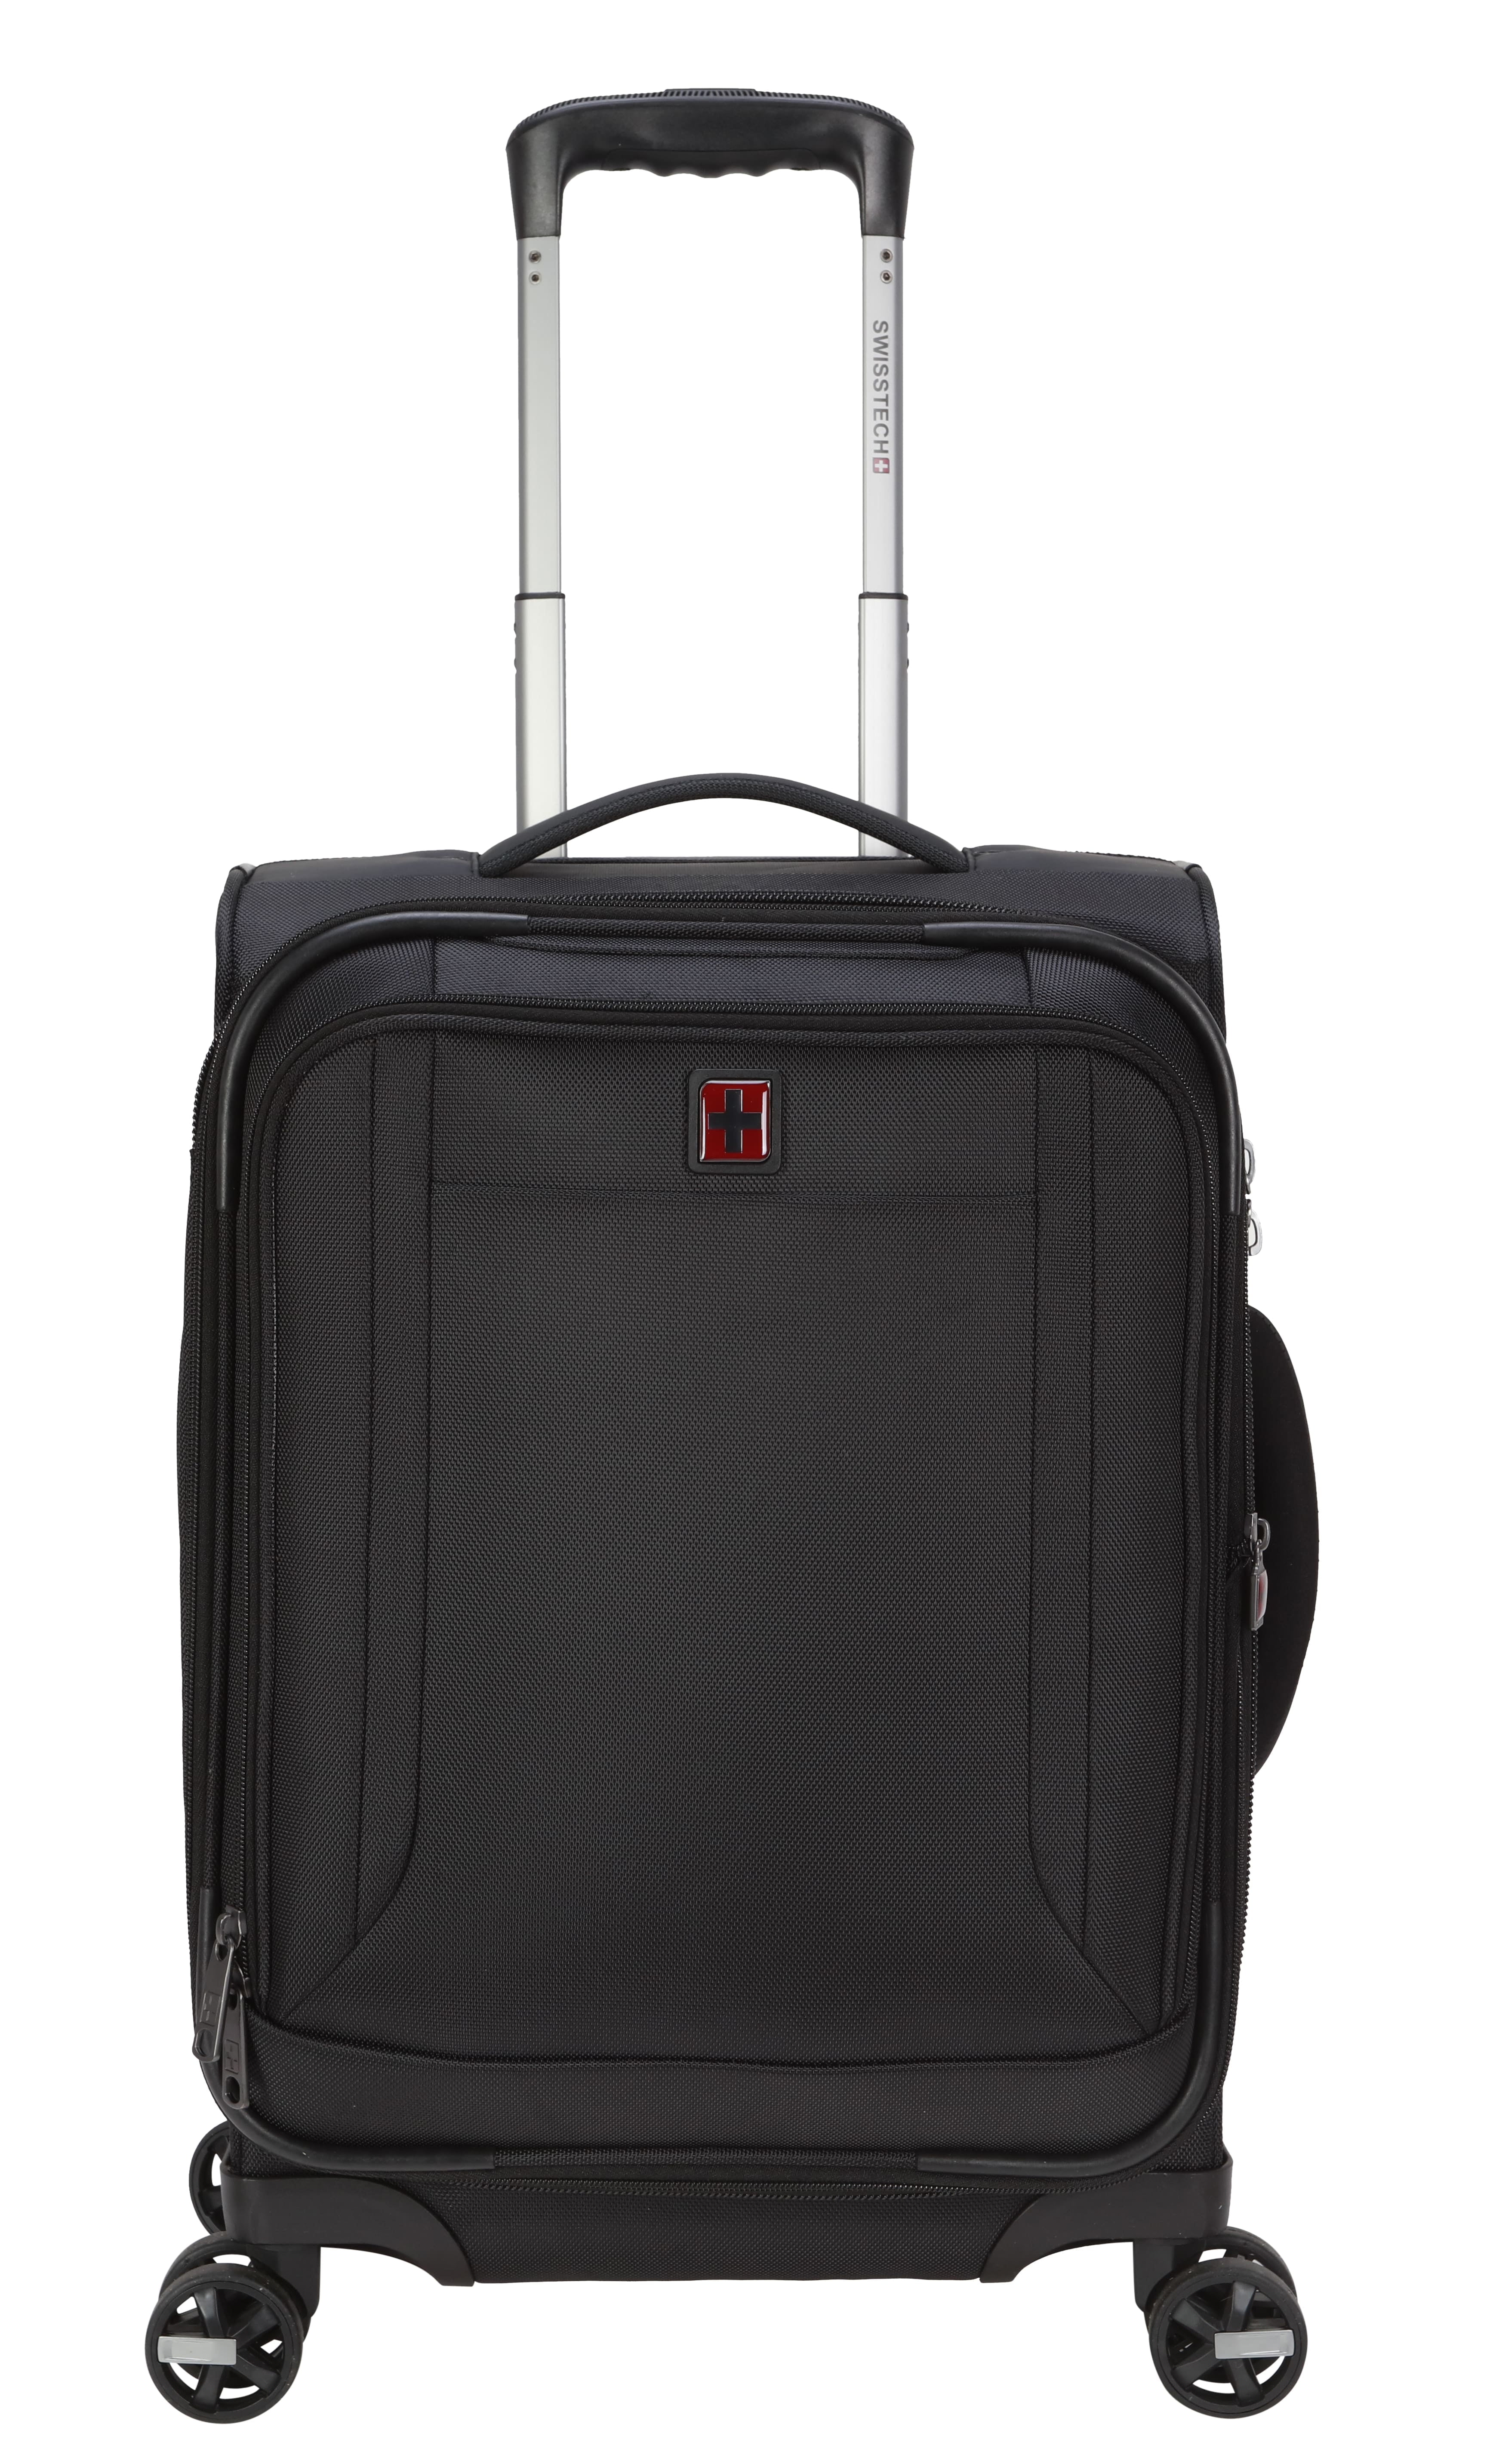 Swiss Tech 20in Softside Carry-on Luggage with 8-Wheel Spinner, Black ...